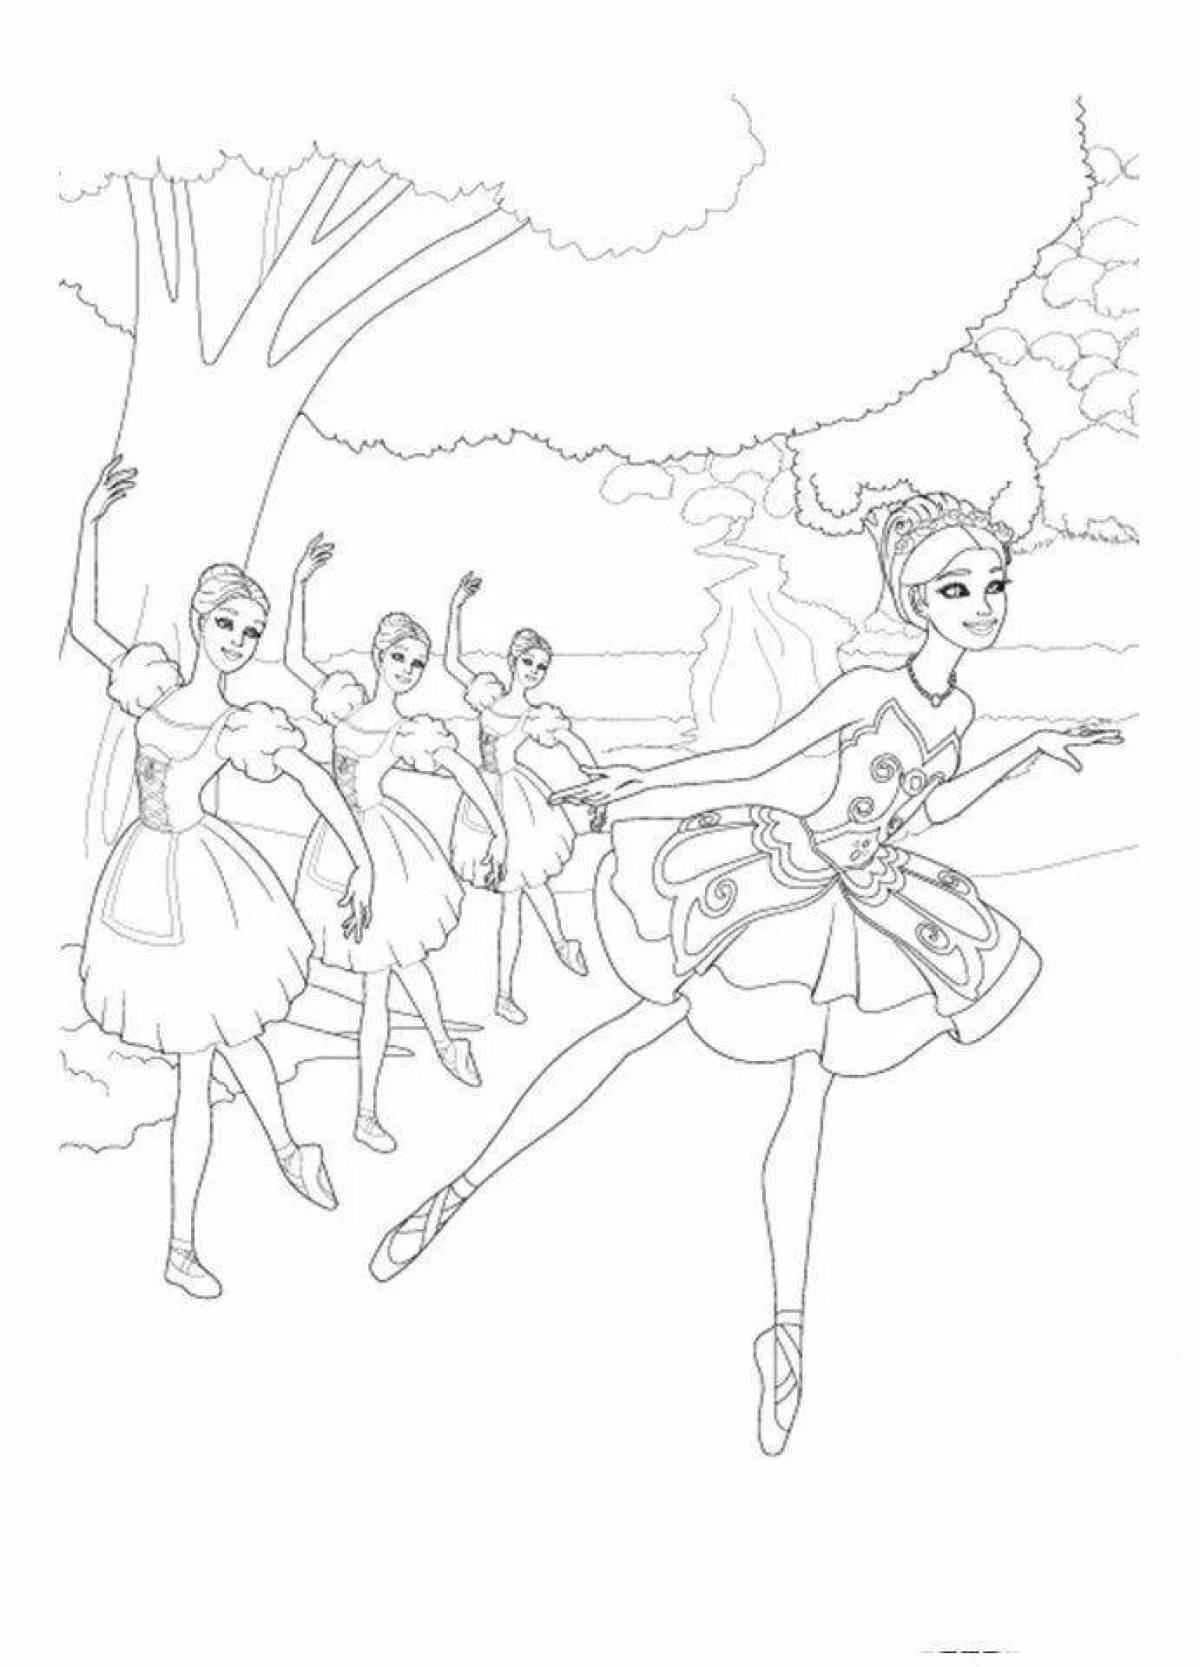 Fancy coloring of the most beautiful ballerinas